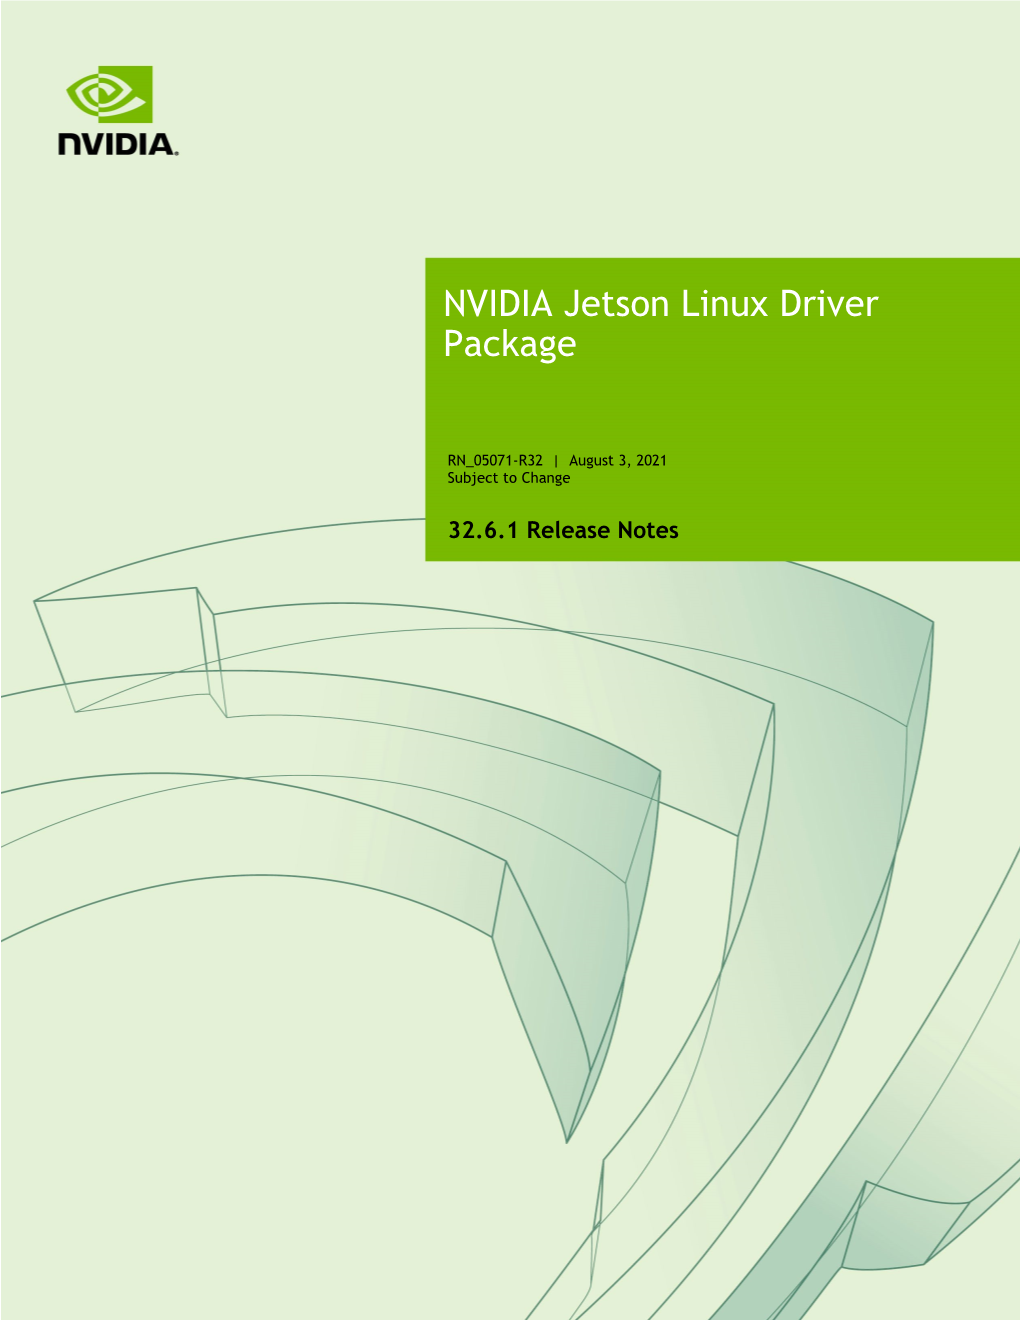 NVIDIA Jetson Linux Driver Package